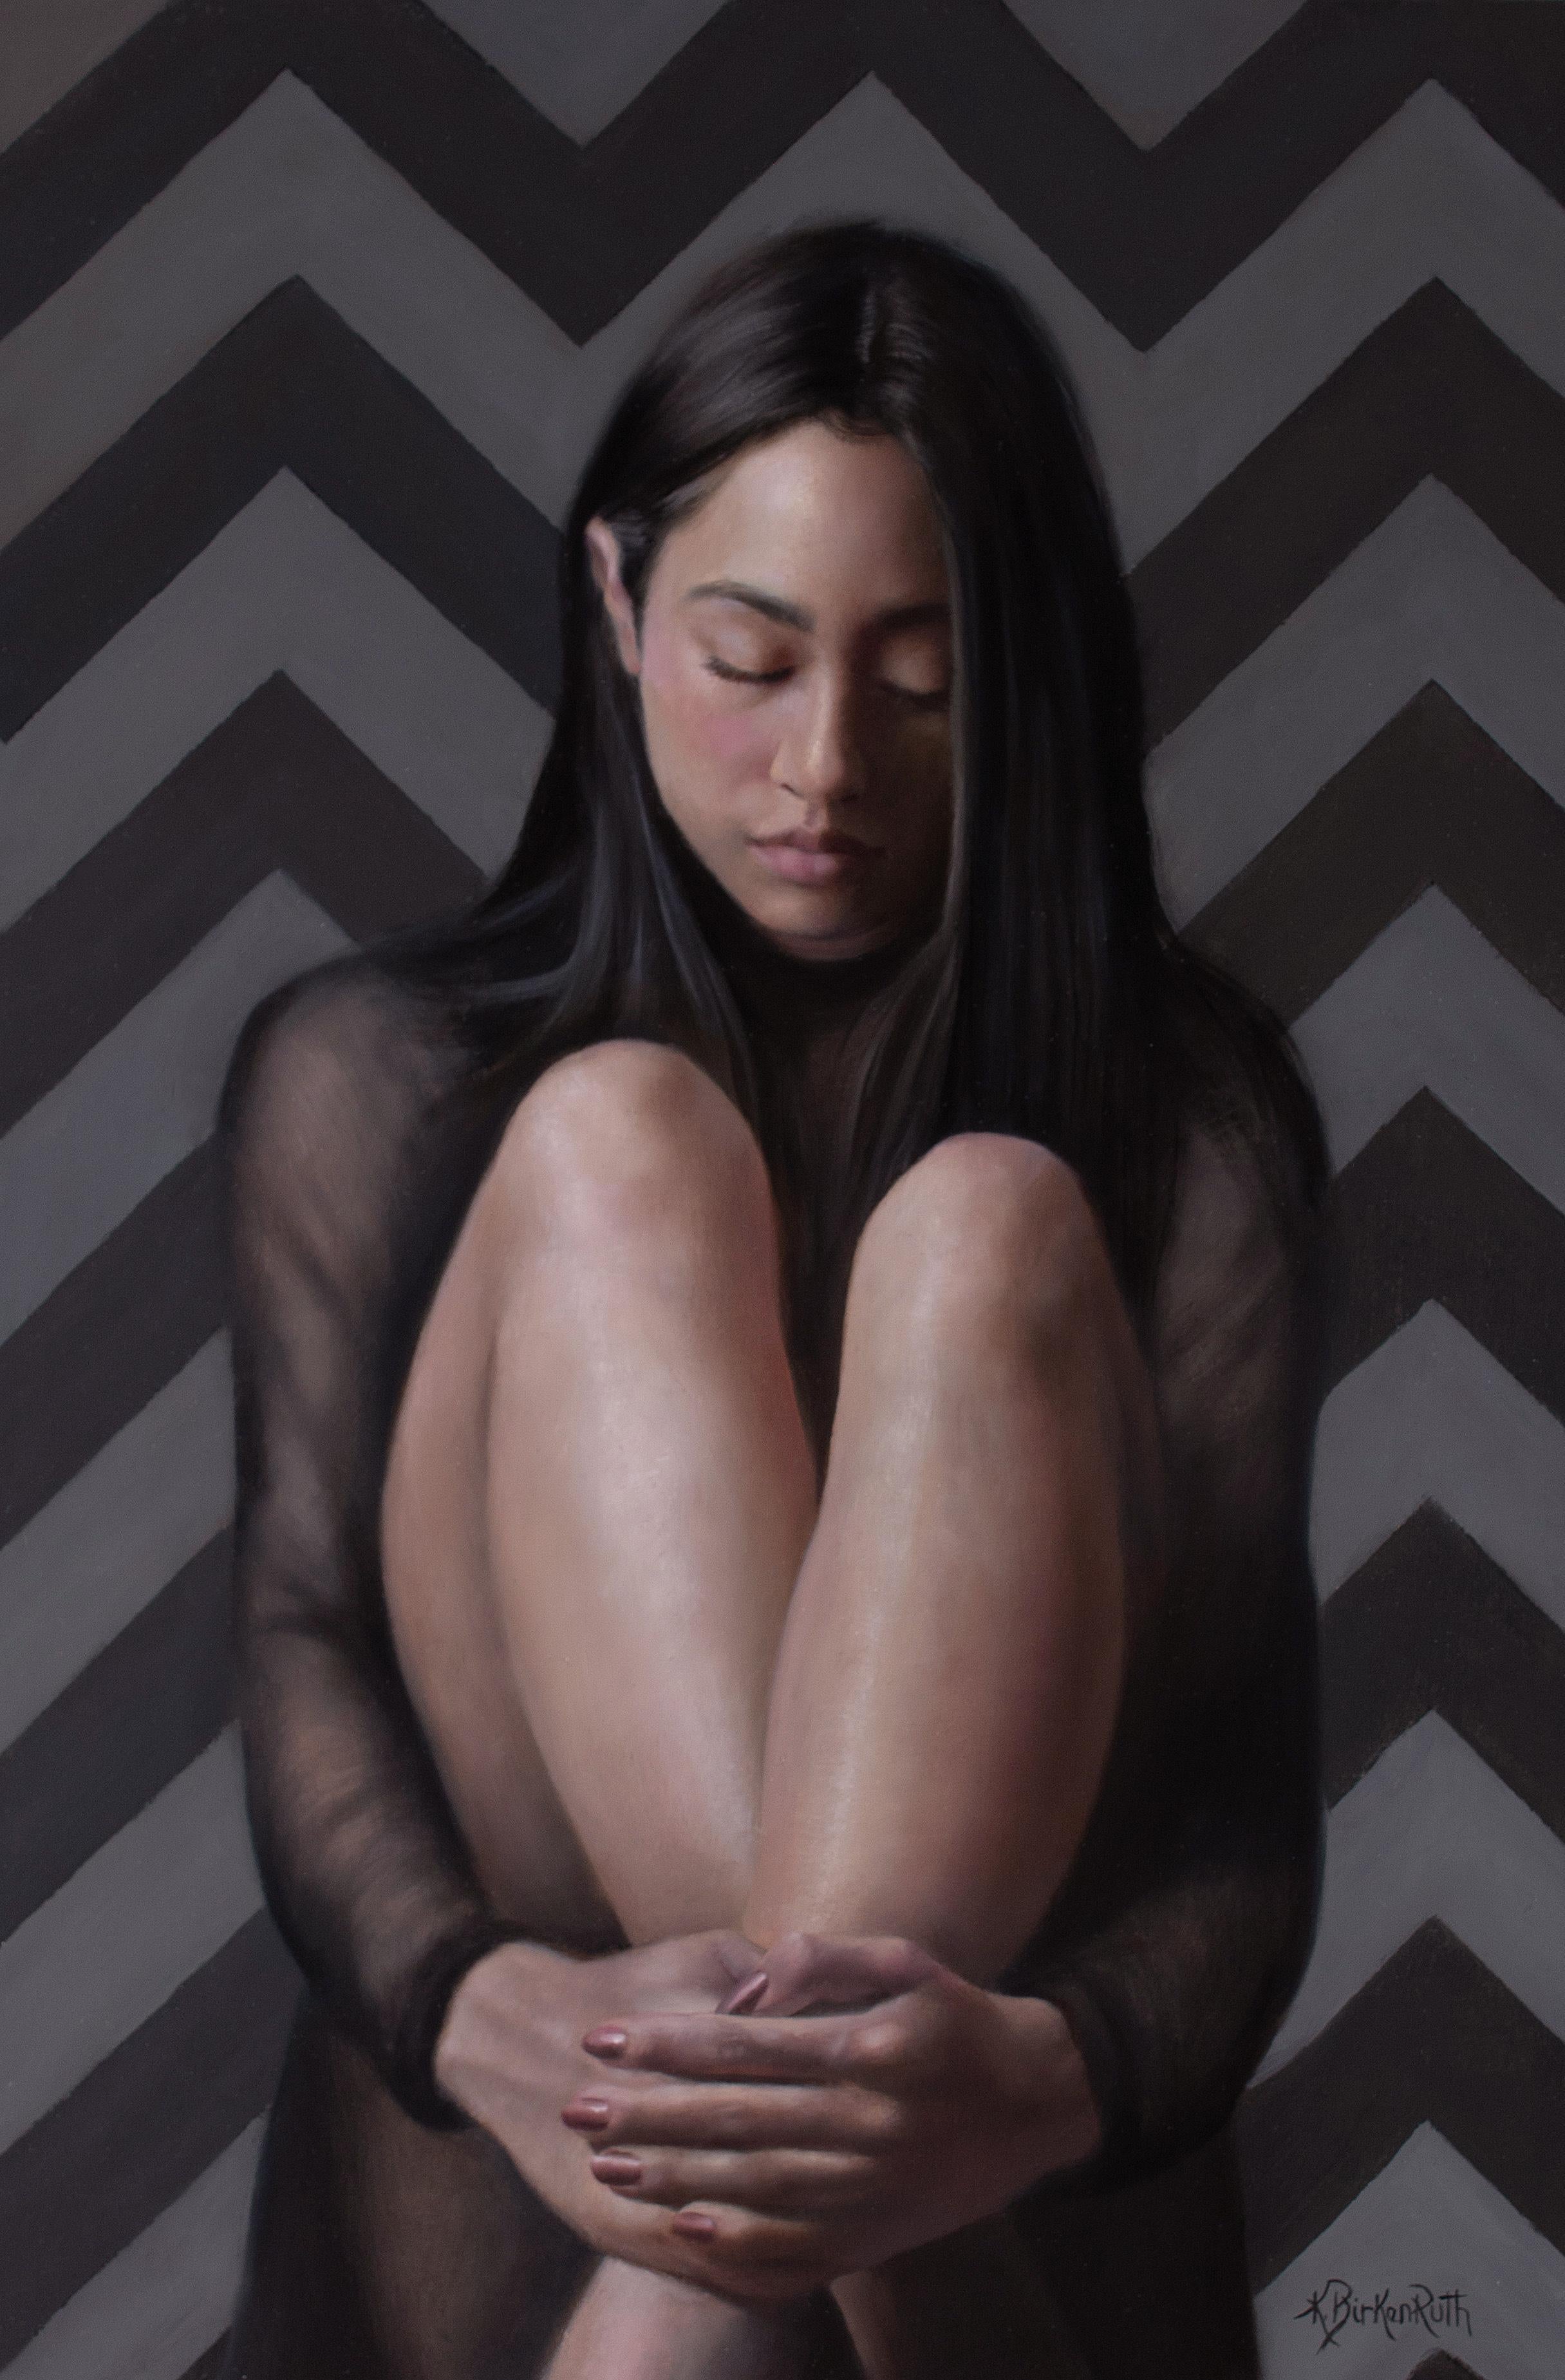 Kelly Birkenruth's "Meditation" (2023) is an original oil painting on panel, measuring 18 x 12 x 2 inches. This evocative artwork depicts a young woman in a meditative pose, seated with her knees drawn up and her hands clasped around them. The soft,